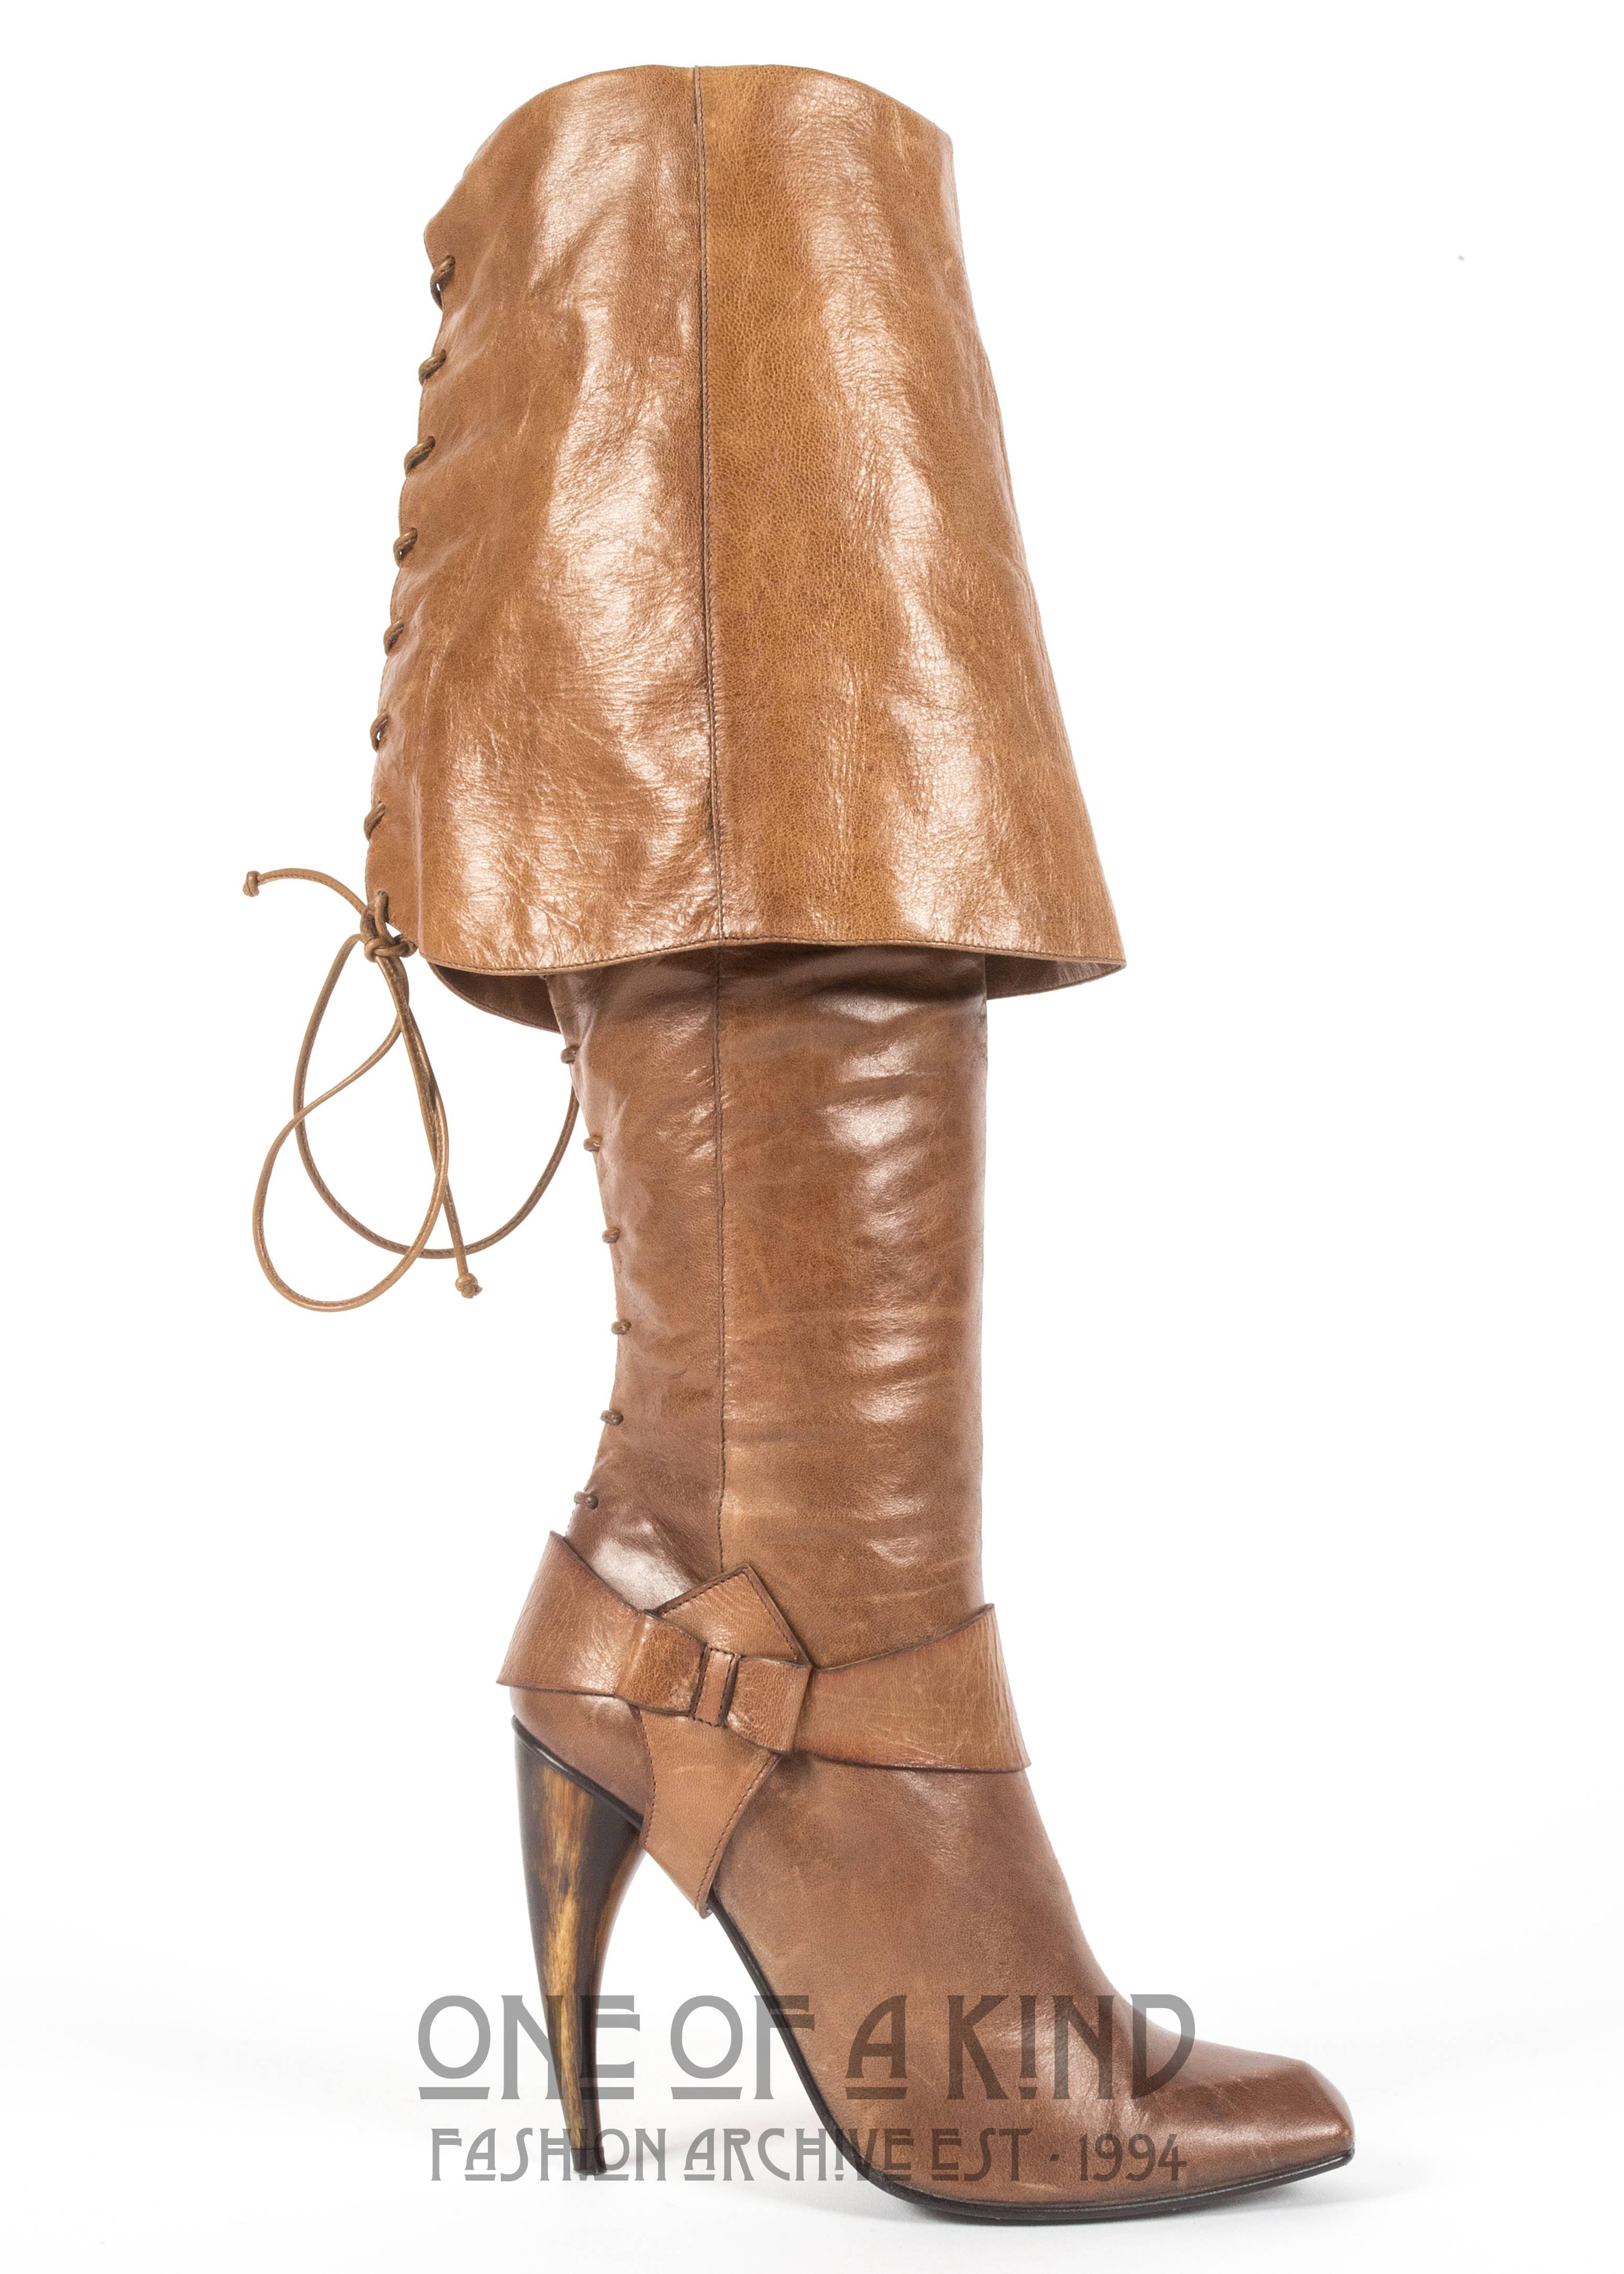 Alexander McQueen Spring-Summer 2003 tan leather turn over boots with horn heel and lace up fastenings